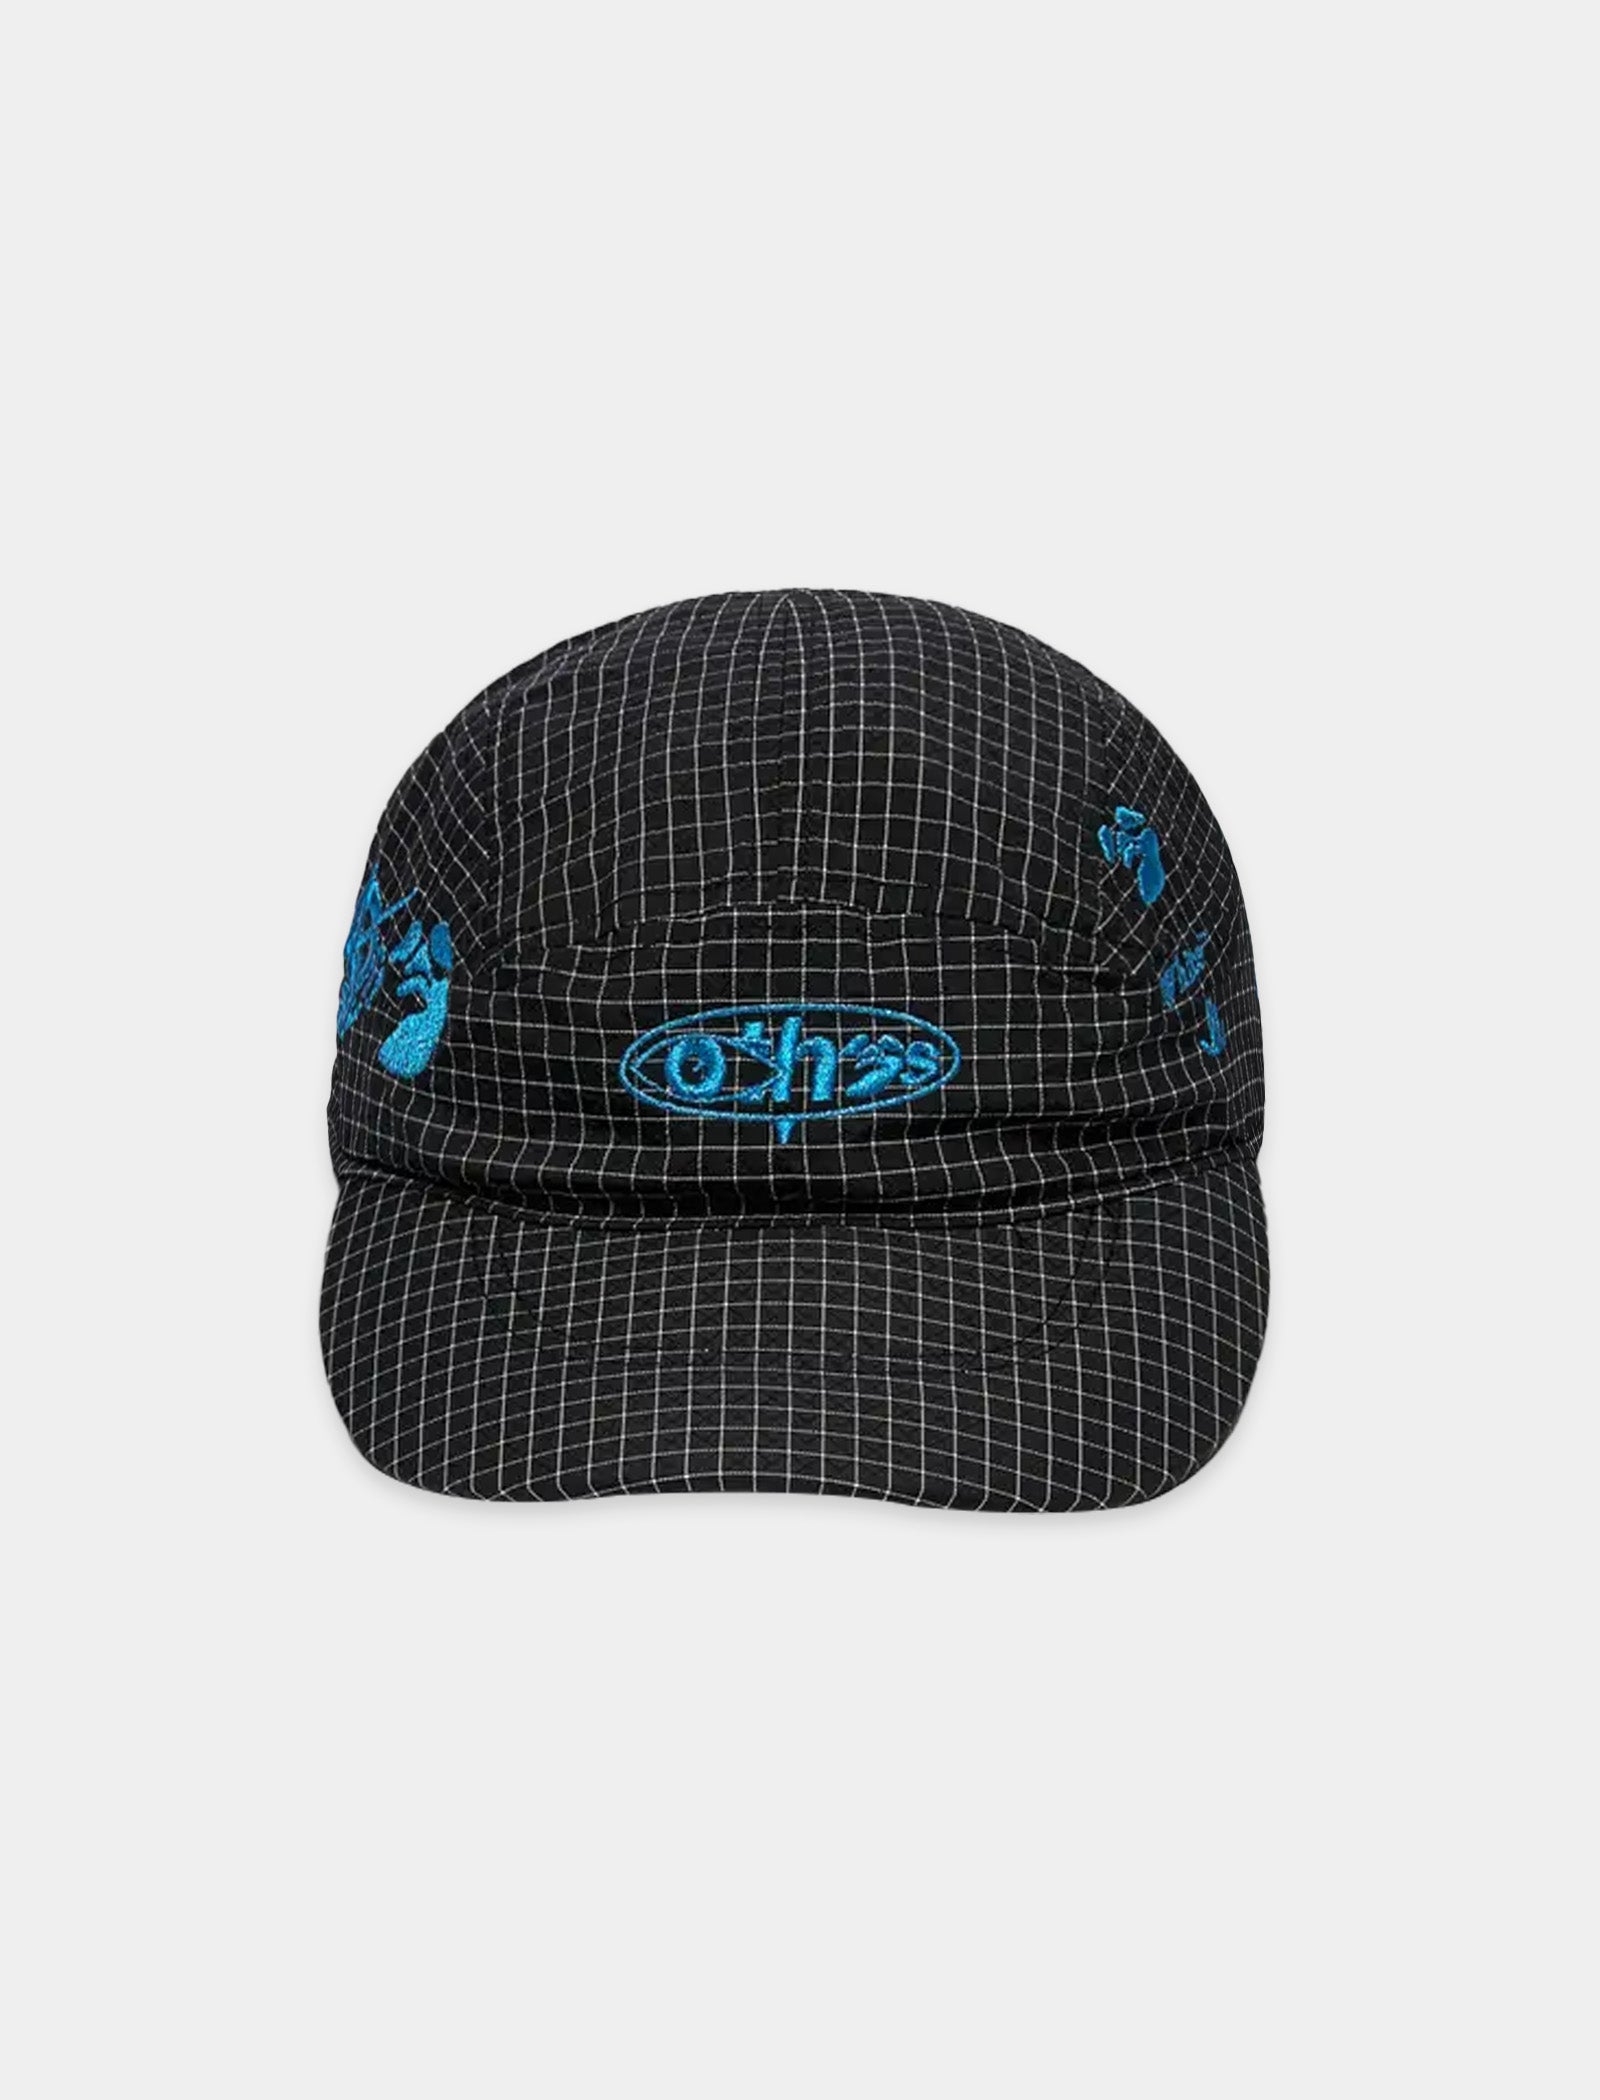 NIKE OFF-WHITE HAT